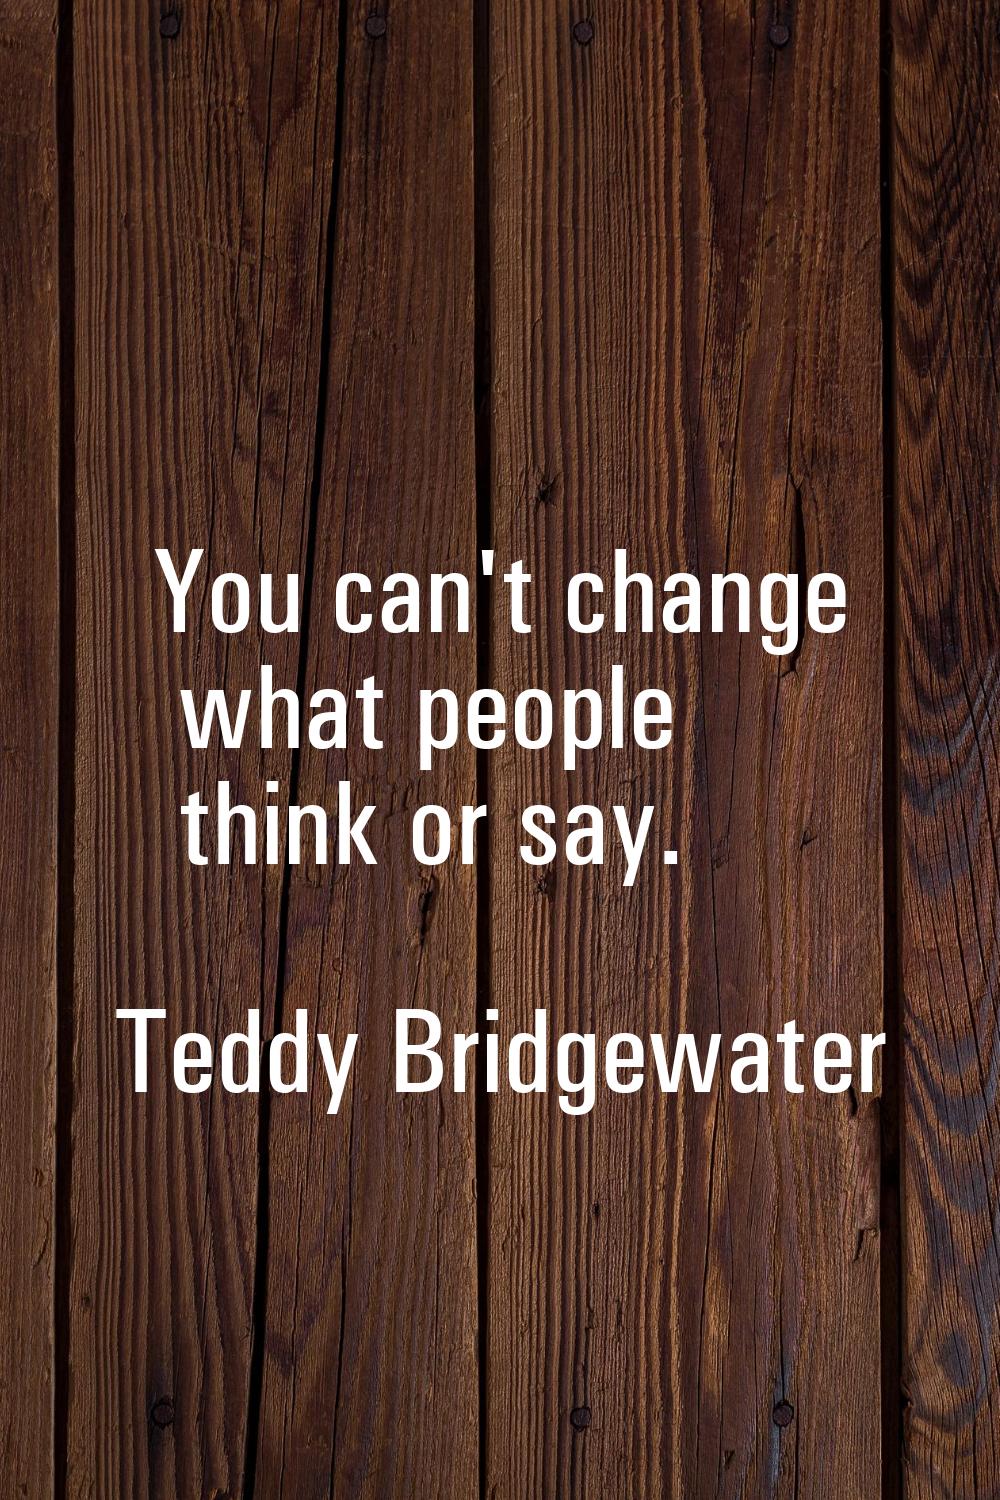 You can't change what people think or say.